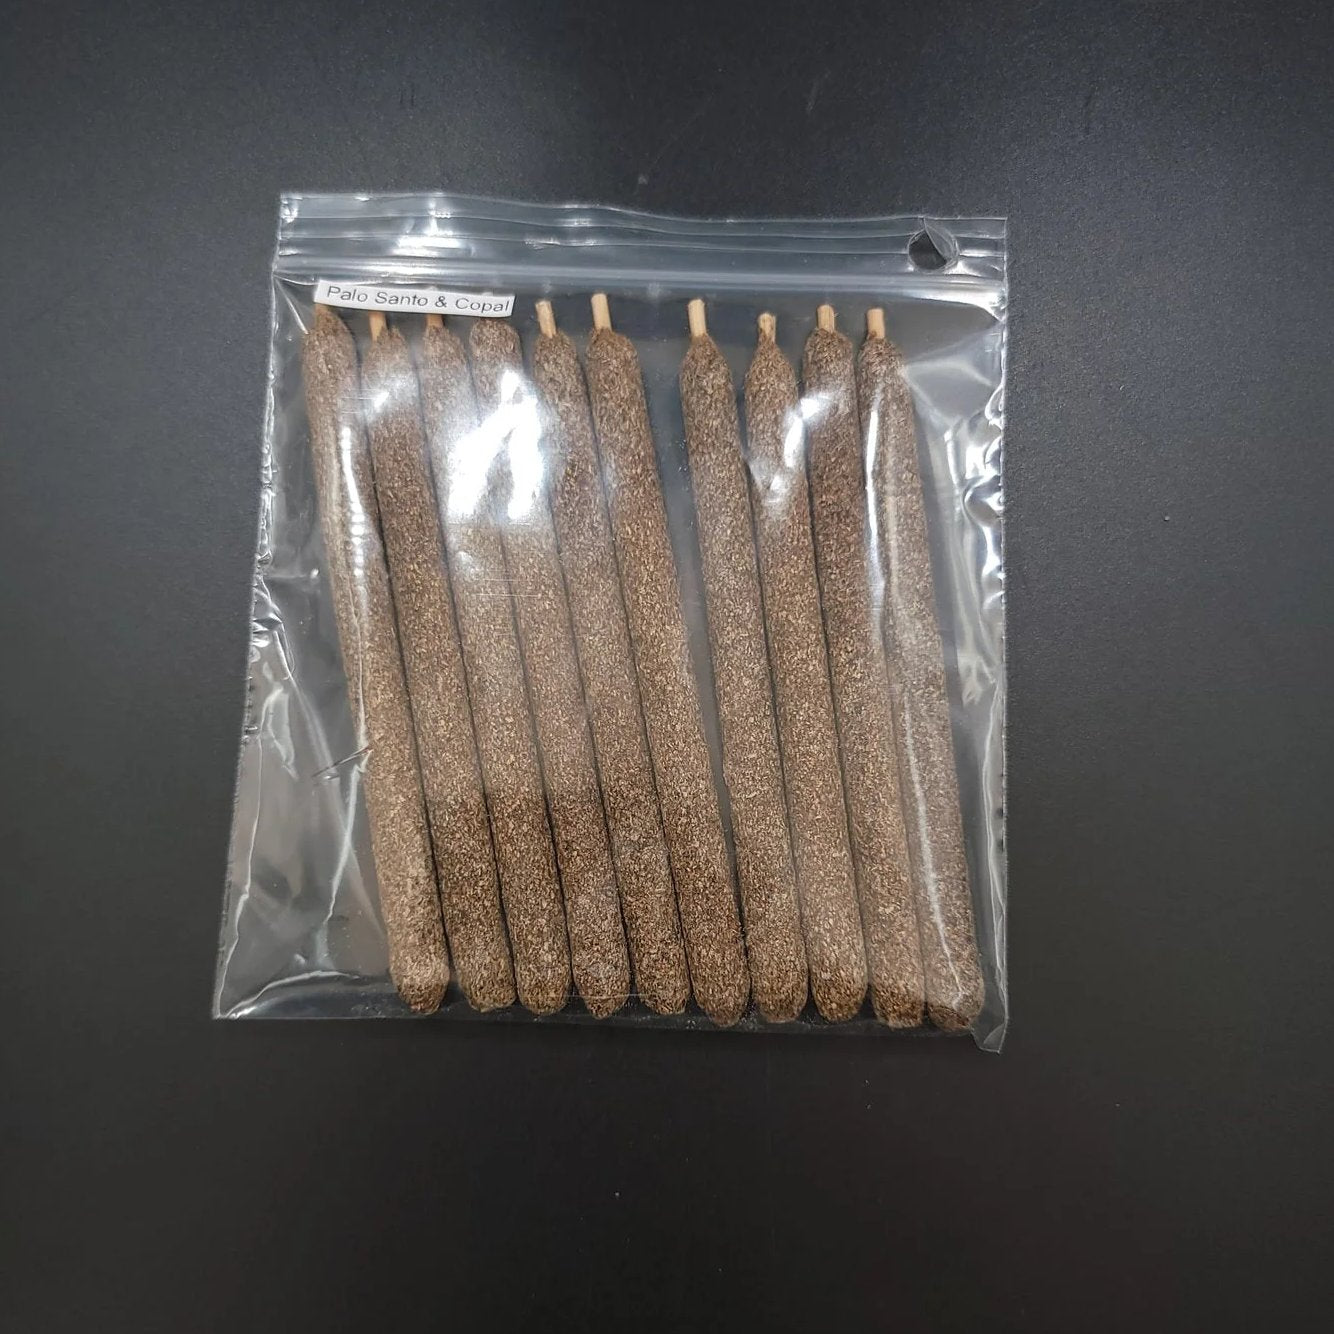 Palo Santo & Copal Incense Stick 4" Hand Rolled - Elevated Metaphysical